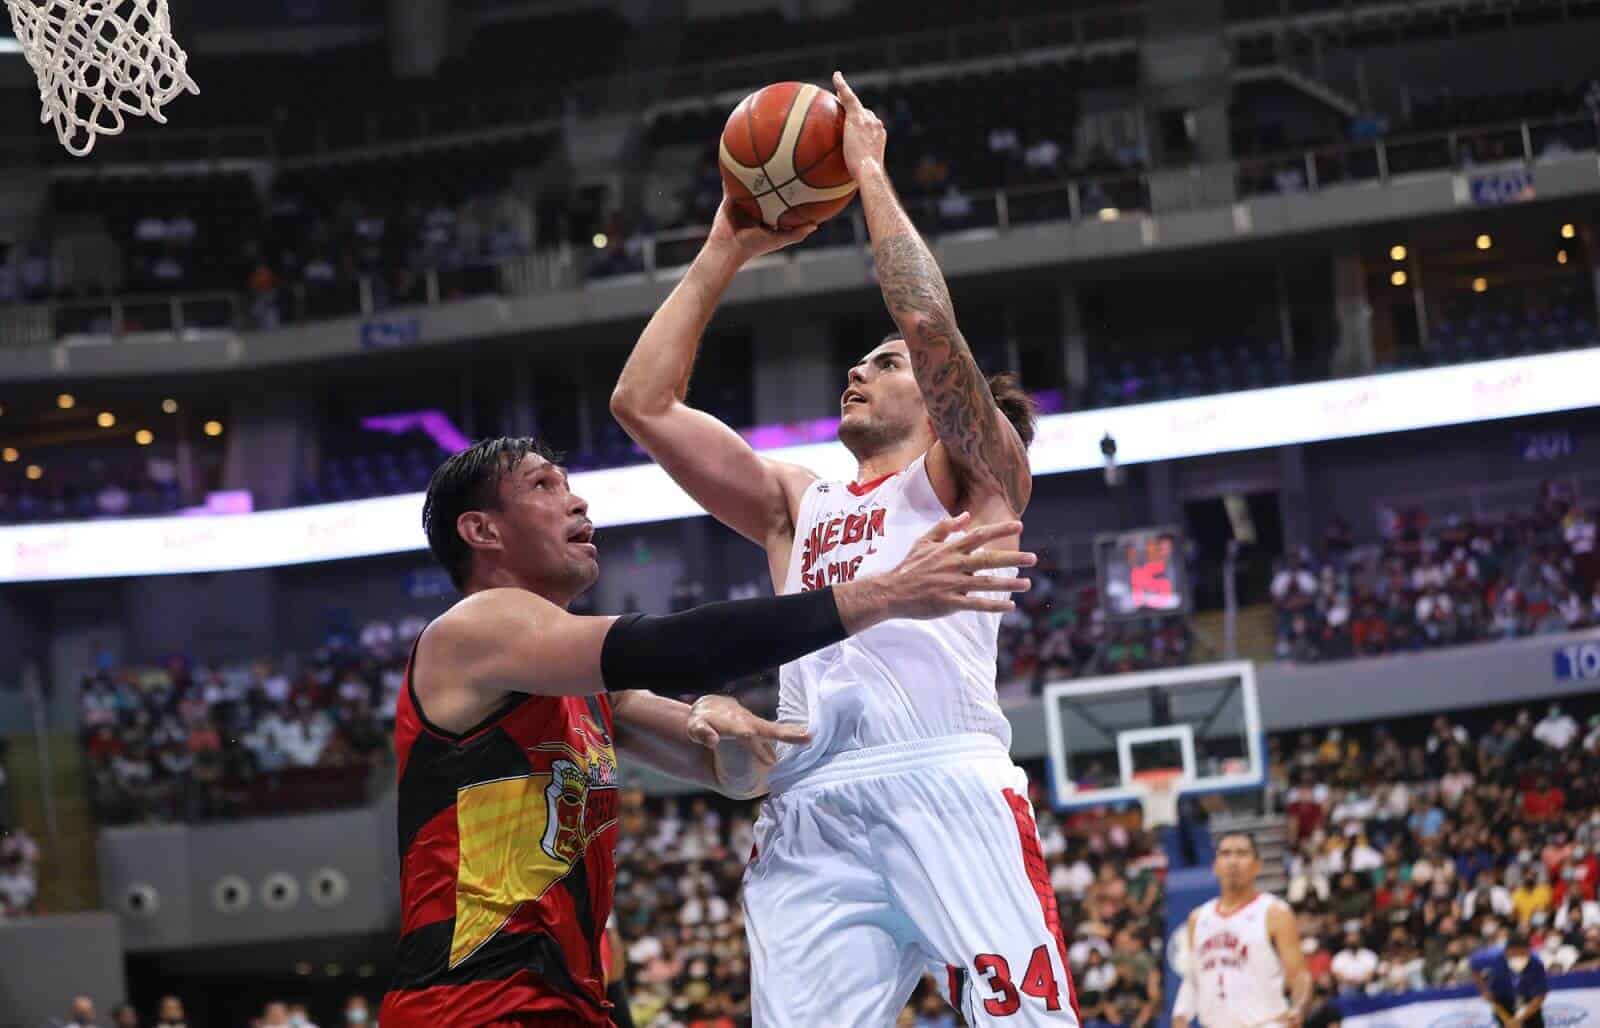 A basketball player blocks a shot in a game against San Miguel.